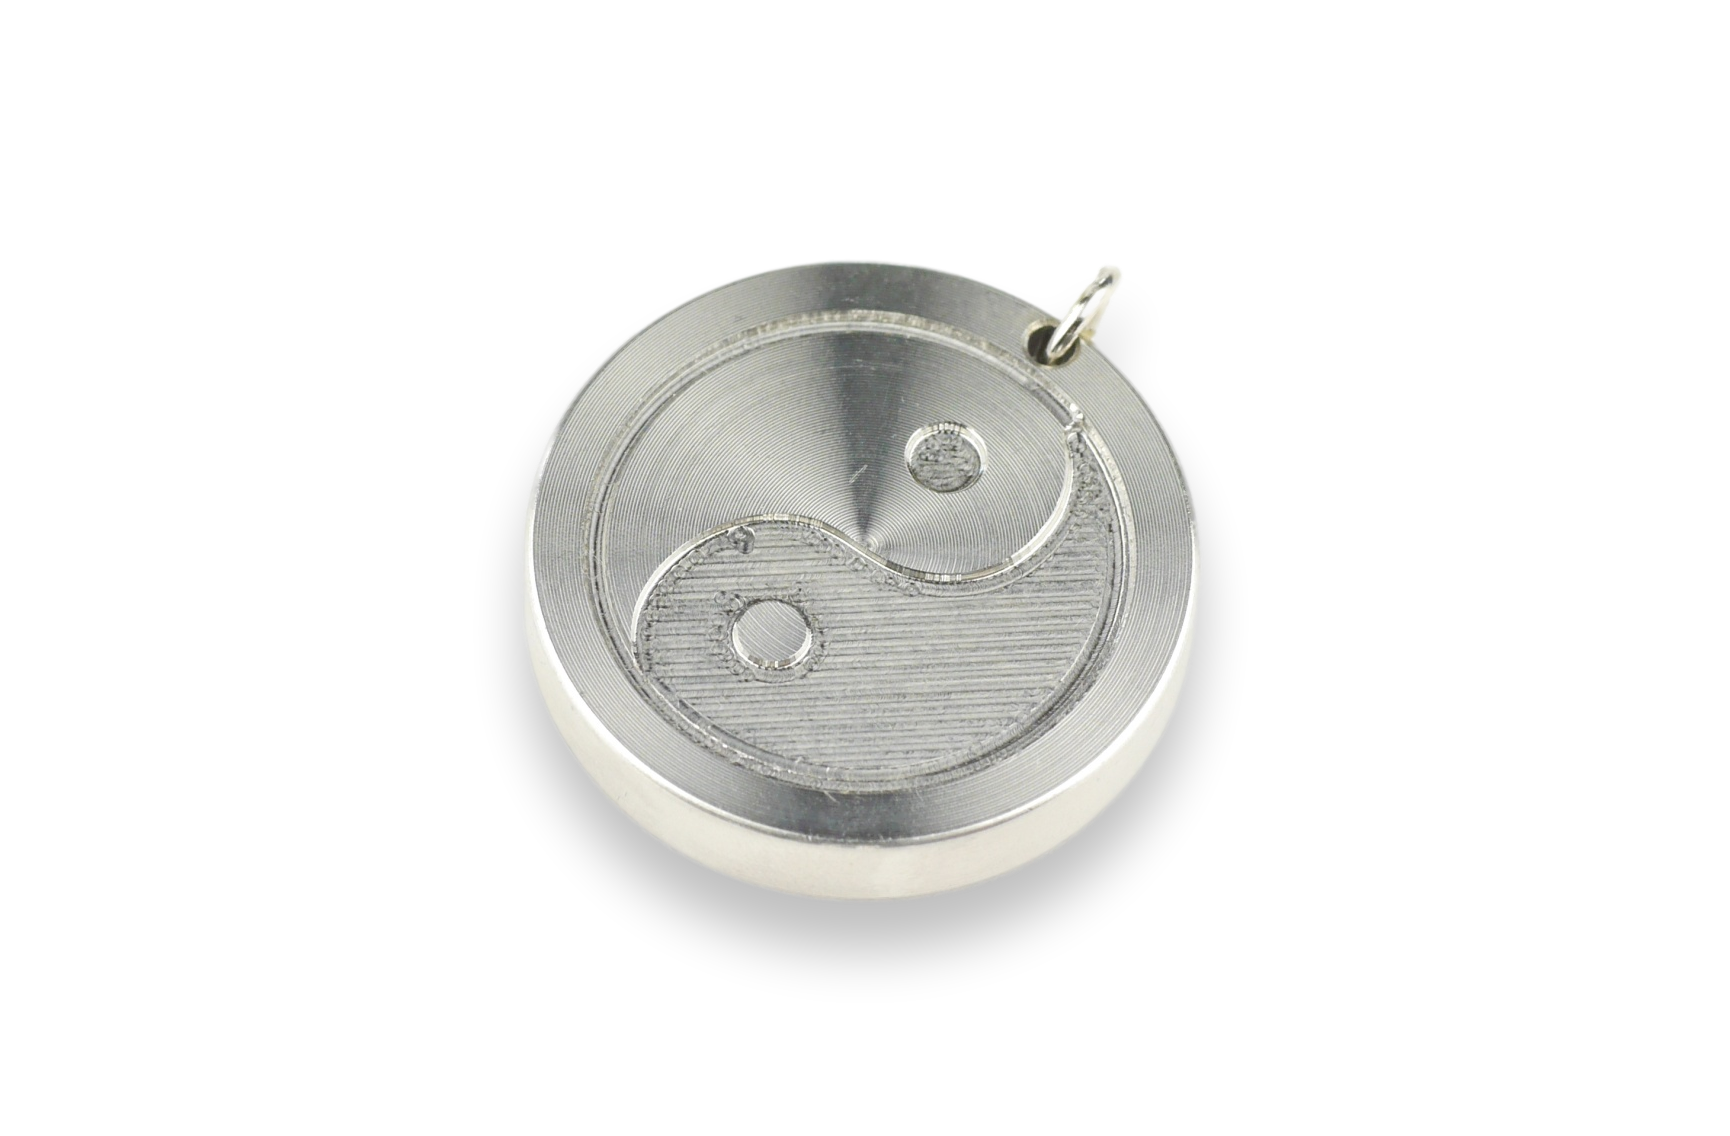 ZES Bodyguard 25 stainless steel with YinYang engraving